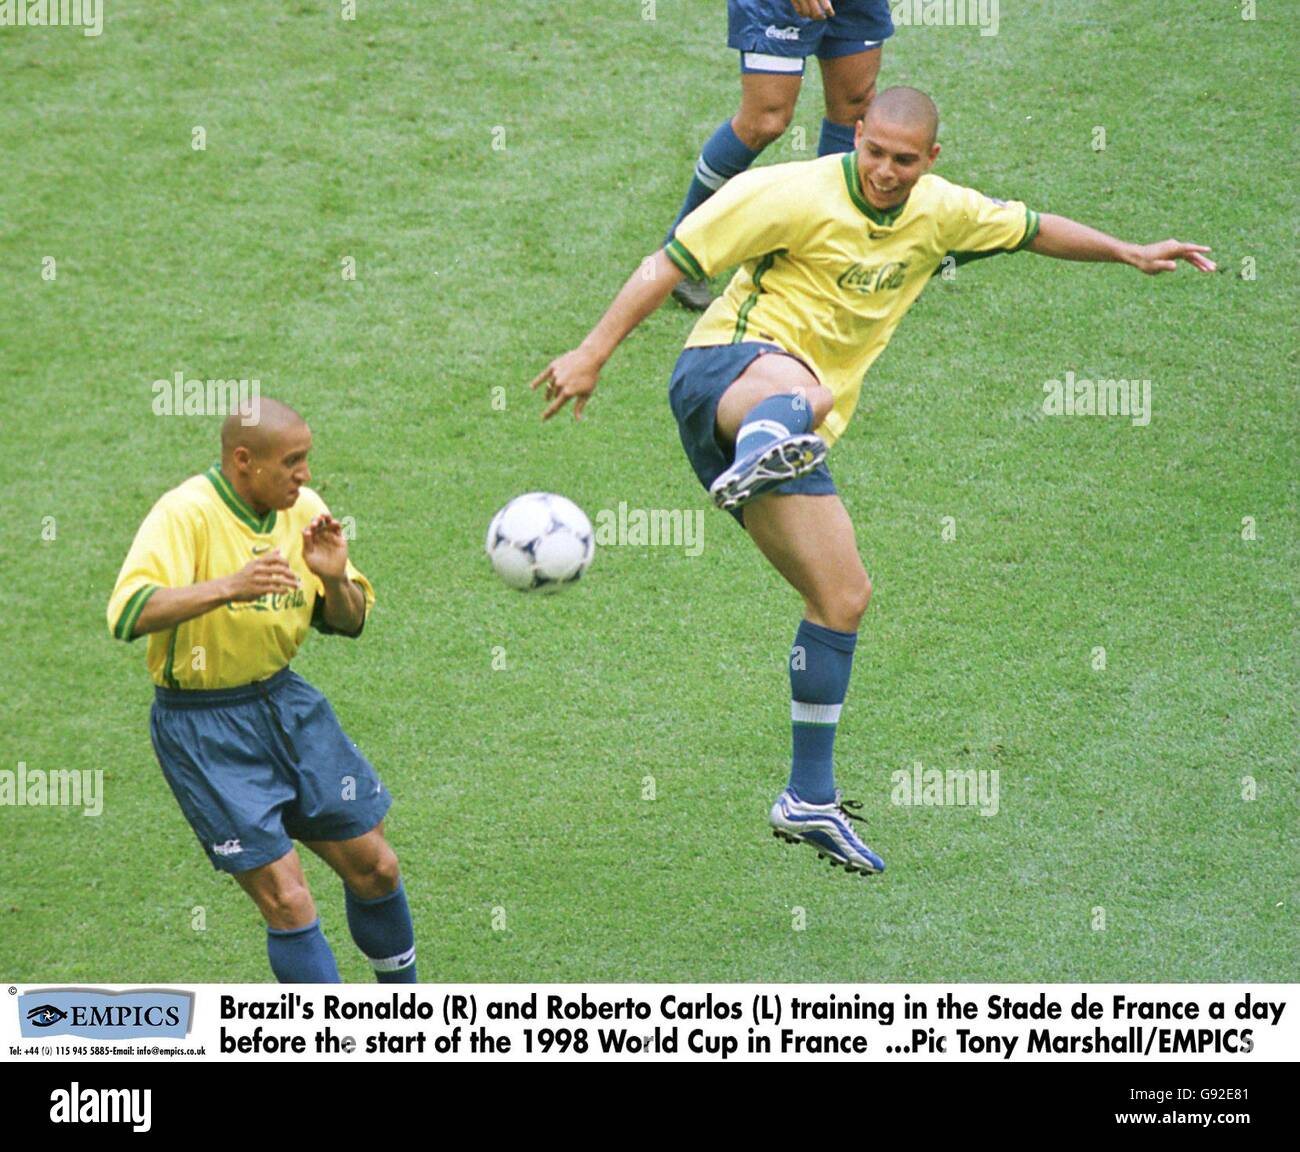 Brazil's Ronaldo (R) and Roberto Carlos (L) training in the Stade de France a day before the start of the 1998 World Cup in France Stock Photo